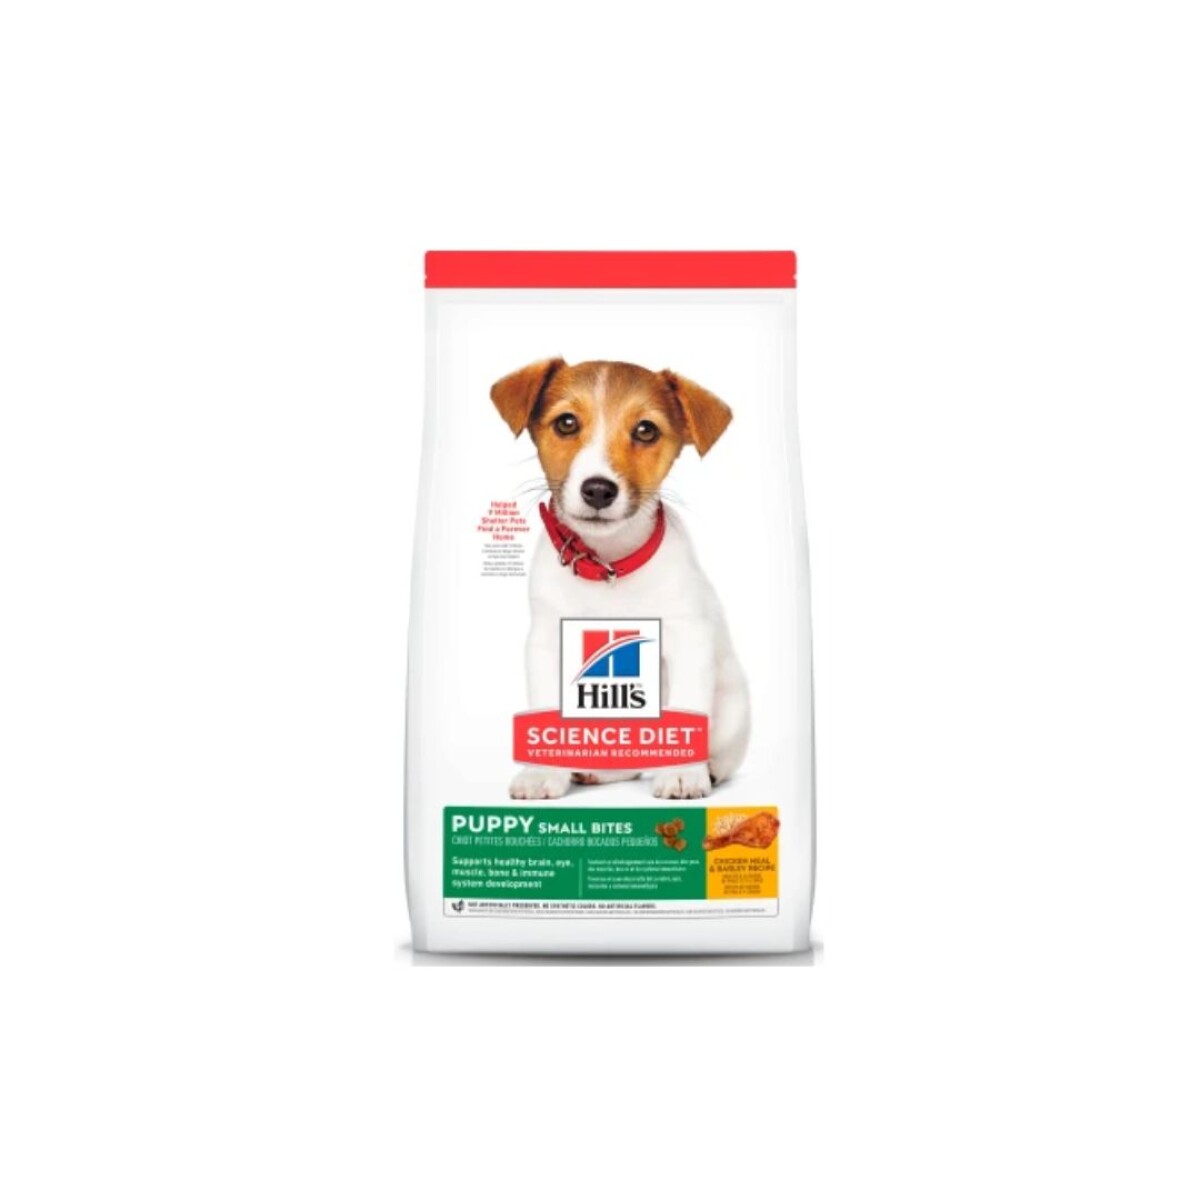 HILLS CANINE PUPPY SMALL BITES 2.04 KG - Unica 